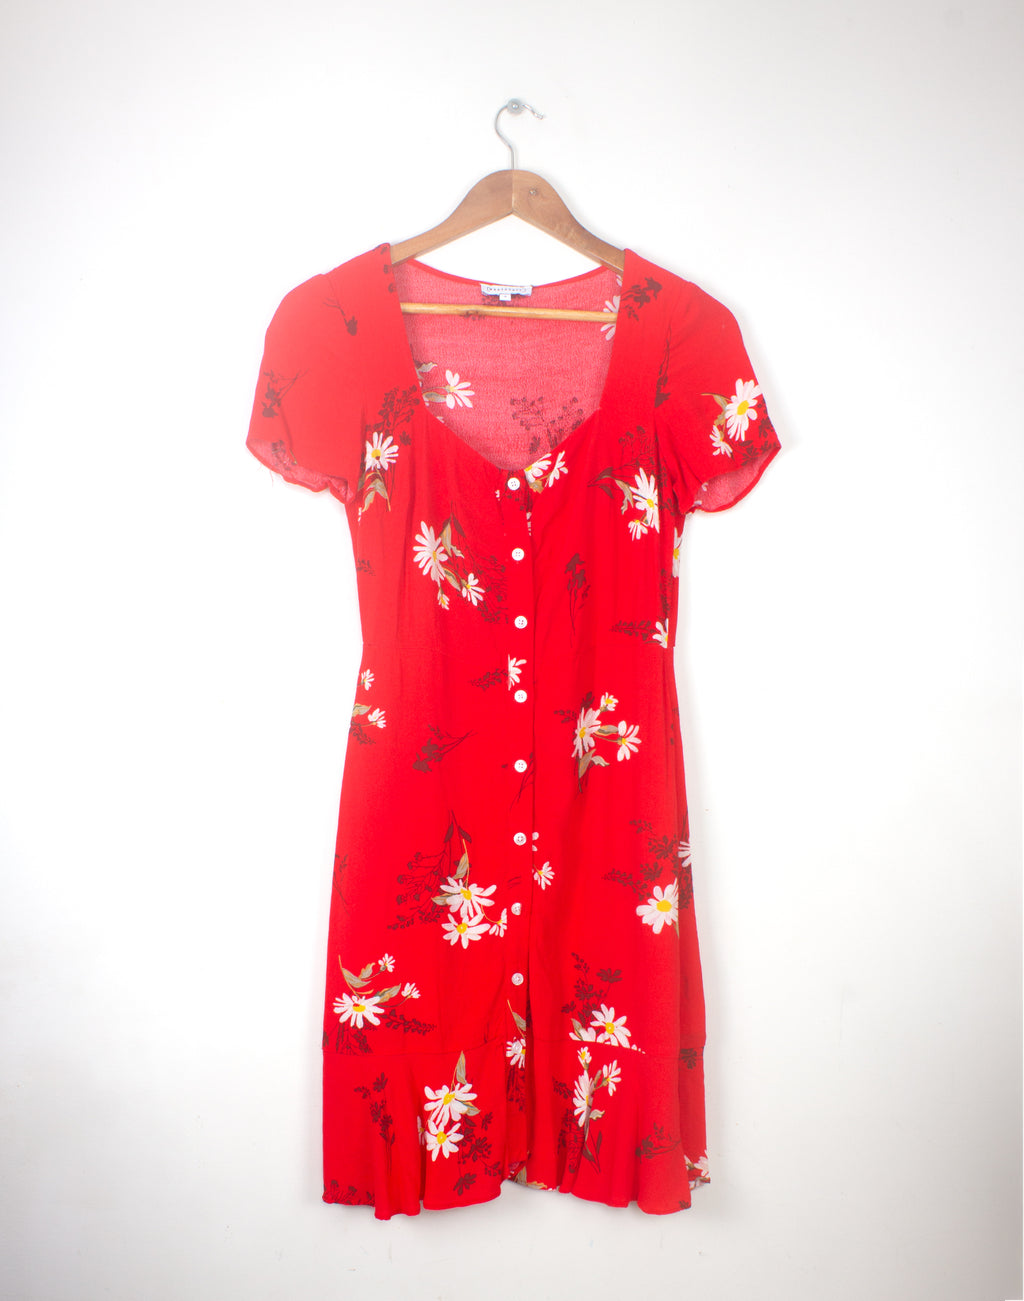 Warehouse Red Daisy Floral Dress - Size XS